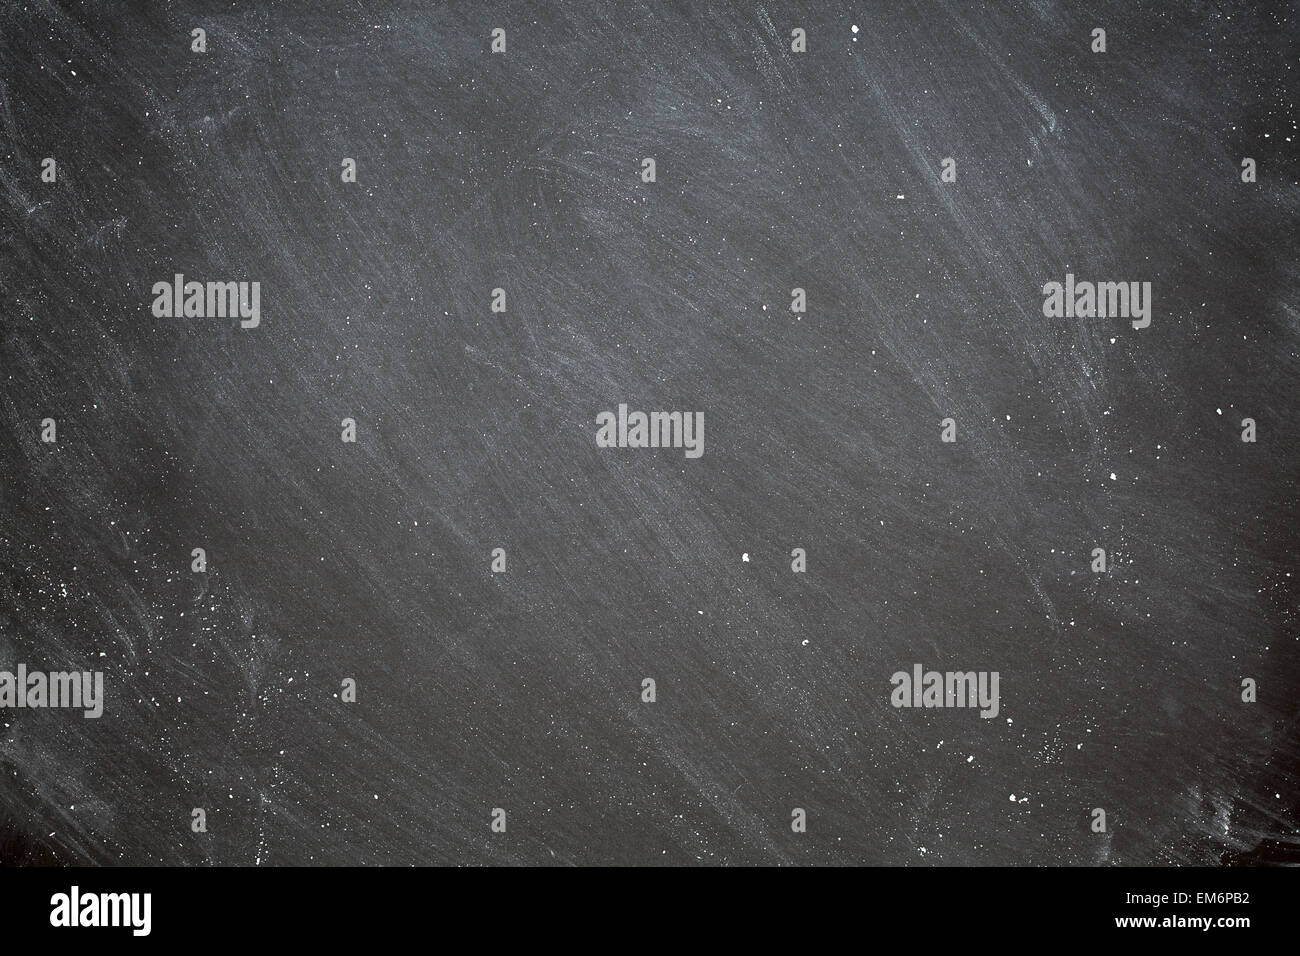 Chalkboard Background Retro Style Charcoal Gray Black Chalk Board with White Dust Eraser Marks Stock Photo